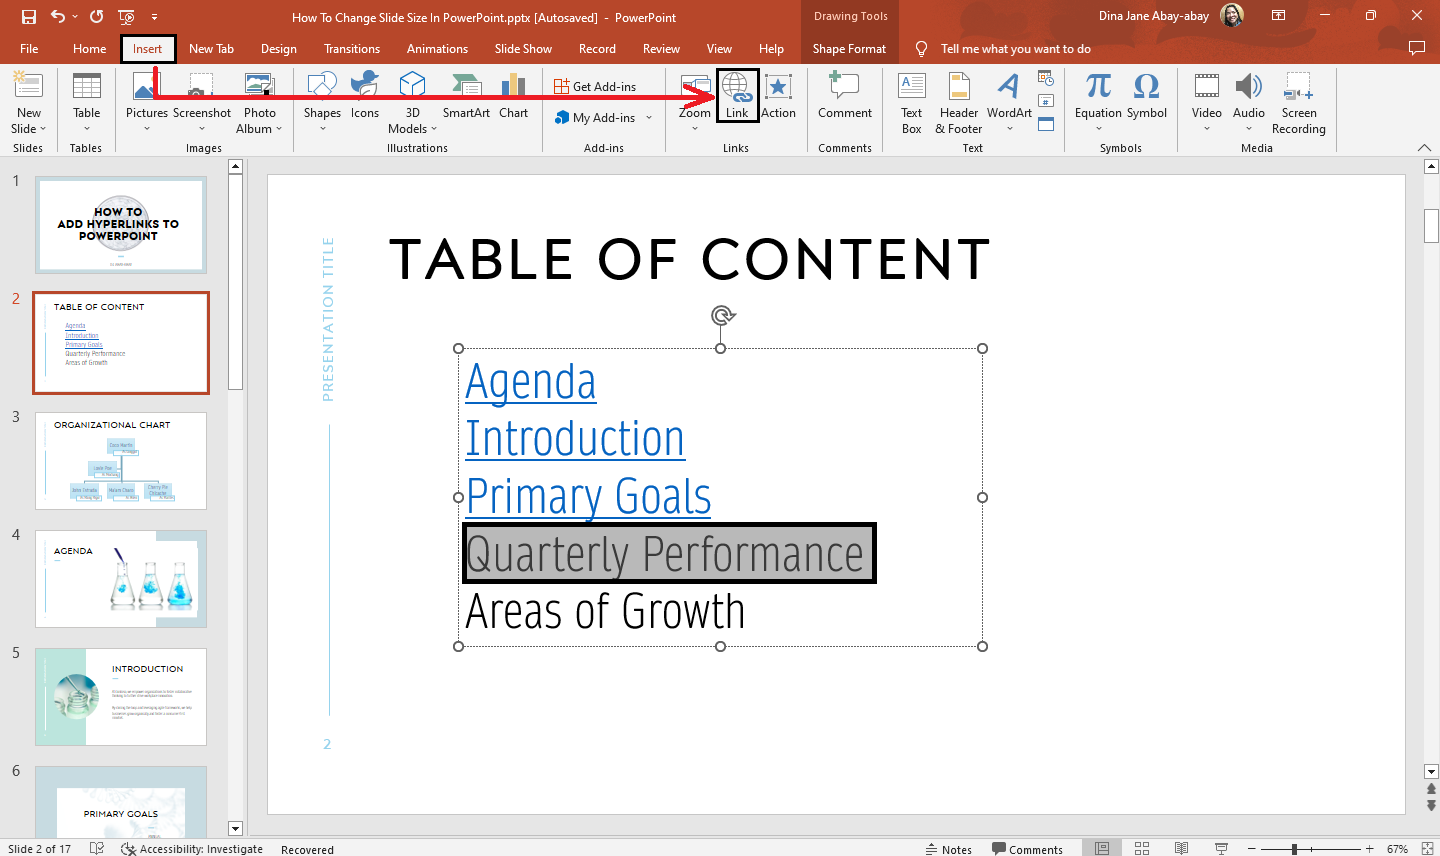 Highlight a text in your presentation slide, then go to "Insert" tab and click the "Link" option.